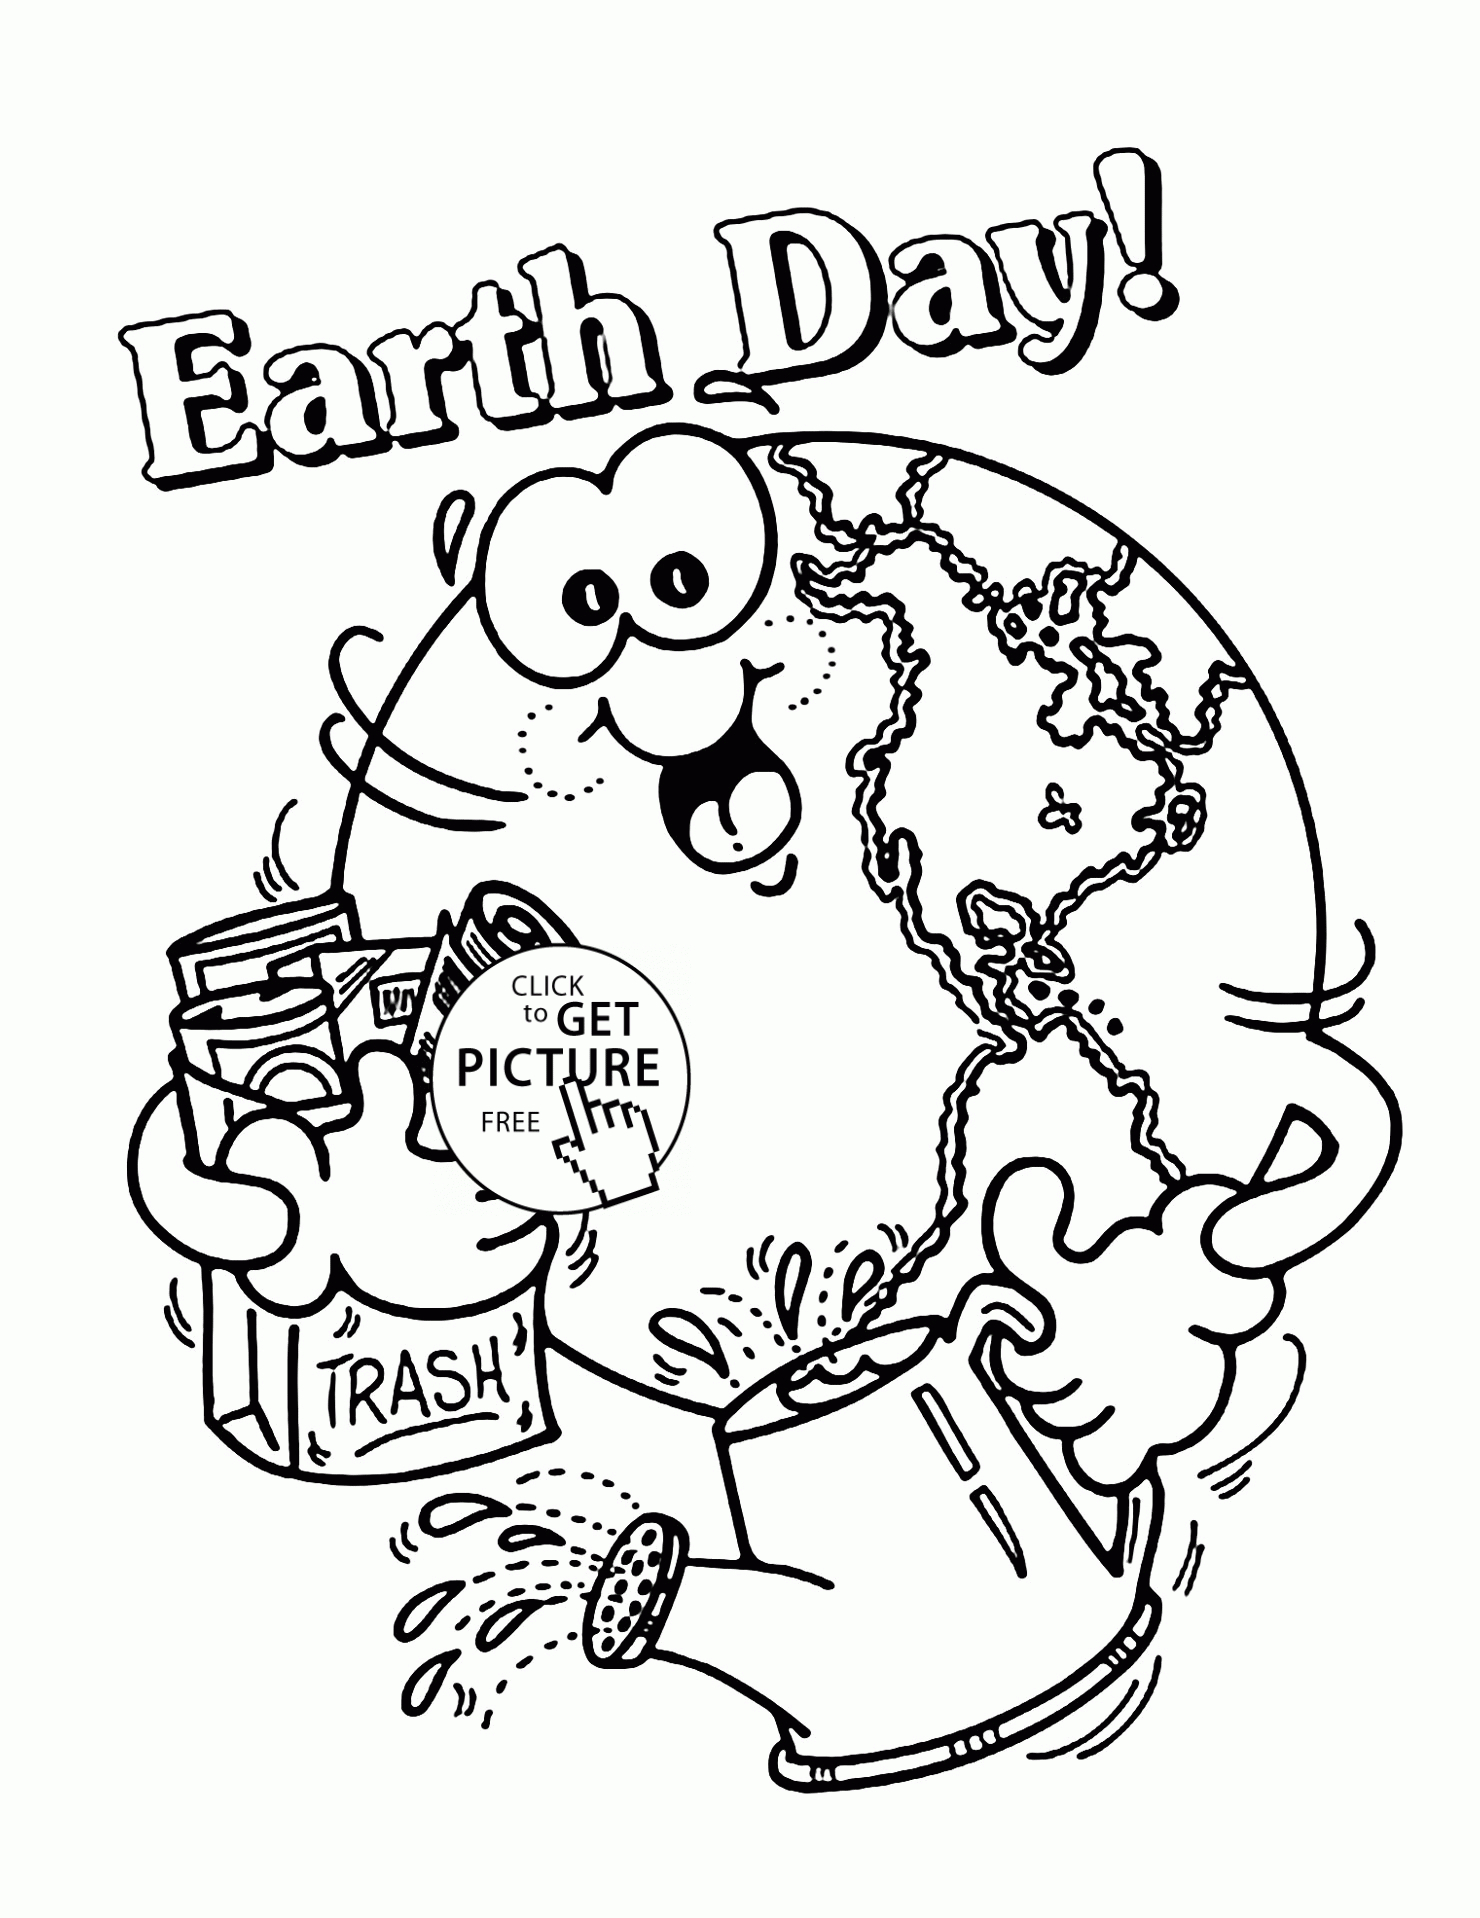 Happy Earth - Earth Day Coloring Page For Kids, Coloring Pages - Earth Coloring Pages Free Printable